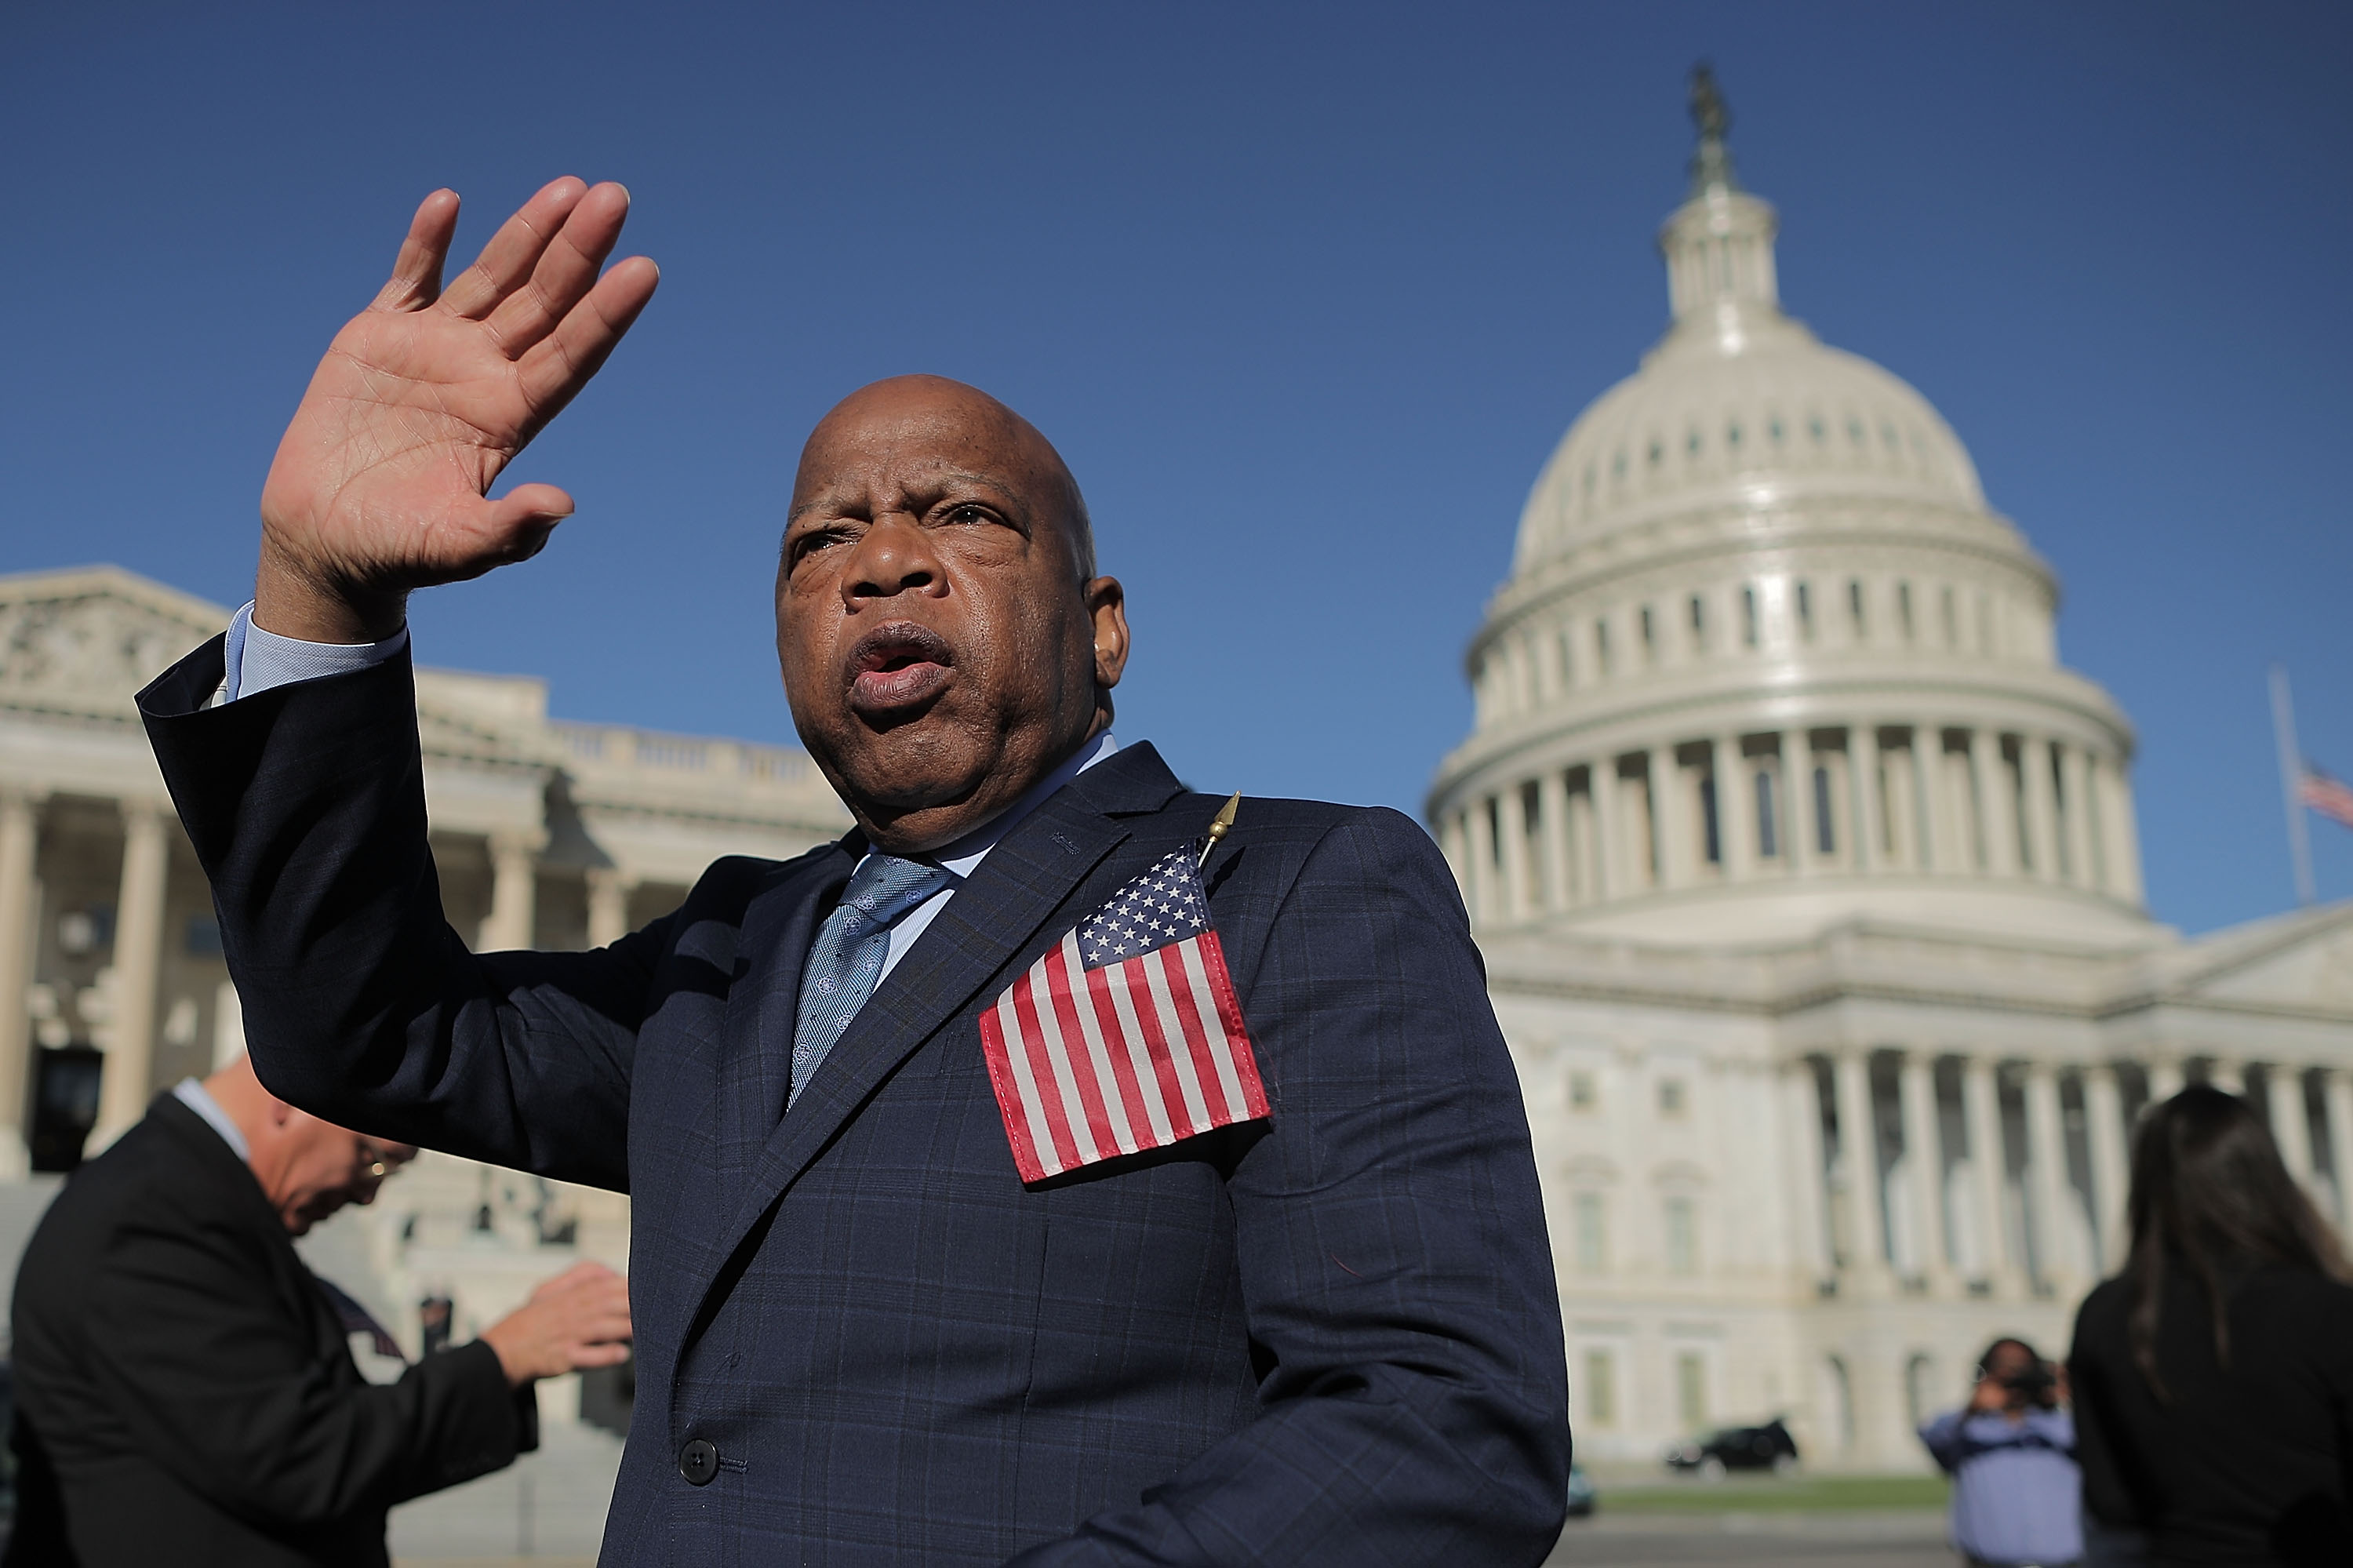 Rep. John Lewis (D-GA) thanks anti-gun violence supporters following a rally with fellow Democrats on the East Front steps of the U.S. House of Representatives October 4, 2017 in Washington, DC. (Chip Somodevilla—Getty Images)